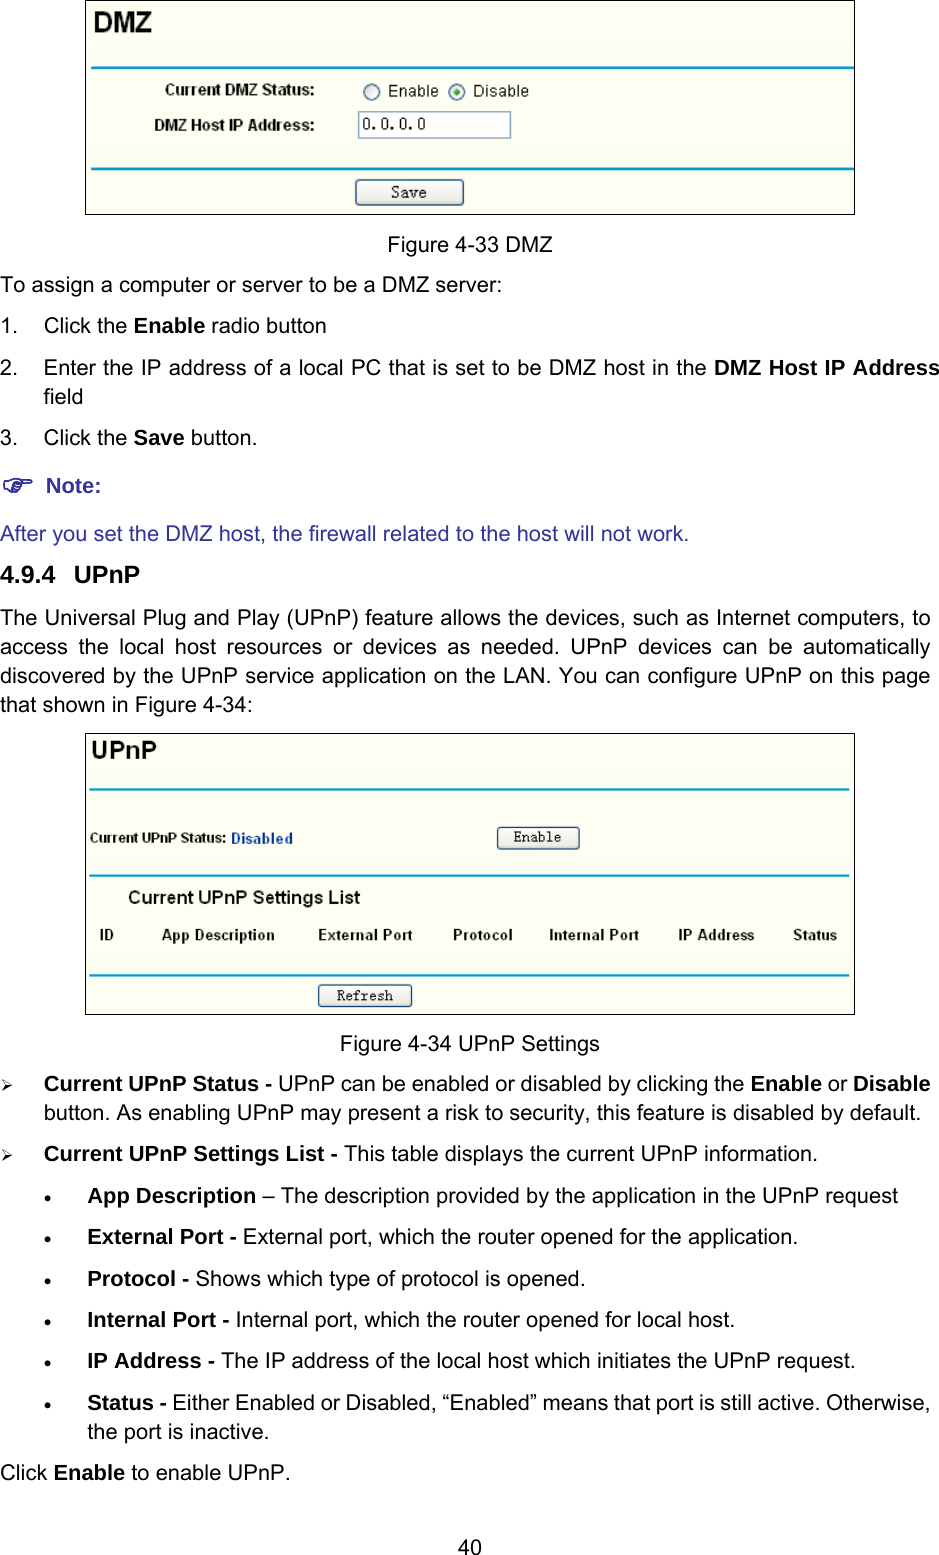  40  Figure 4-33 DMZ To assign a computer or server to be a DMZ server:   1. Click the Enable radio button 2.  Enter the IP address of a local PC that is set to be DMZ host in the DMZ Host IP Address field 3. Click the Save button. ) Note: After you set the DMZ host, the firewall related to the host will not work. 4.9.4  UPnP The Universal Plug and Play (UPnP) feature allows the devices, such as Internet computers, to access the local host resources or devices as needed. UPnP devices can be automatically discovered by the UPnP service application on the LAN. You can configure UPnP on this page that shown in Figure 4-34:  Figure 4-34 UPnP Settings ¾ Current UPnP Status - UPnP can be enabled or disabled by clicking the Enable or Disable button. As enabling UPnP may present a risk to security, this feature is disabled by default.   ¾ Current UPnP Settings List - This table displays the current UPnP information. • App Description – The description provided by the application in the UPnP request • External Port - External port, which the router opened for the application. • Protocol - Shows which type of protocol is opened. • Internal Port - Internal port, which the router opened for local host. • IP Address - The IP address of the local host which initiates the UPnP request. • Status - Either Enabled or Disabled, “Enabled” means that port is still active. Otherwise, the port is inactive. Click Enable to enable UPnP. 